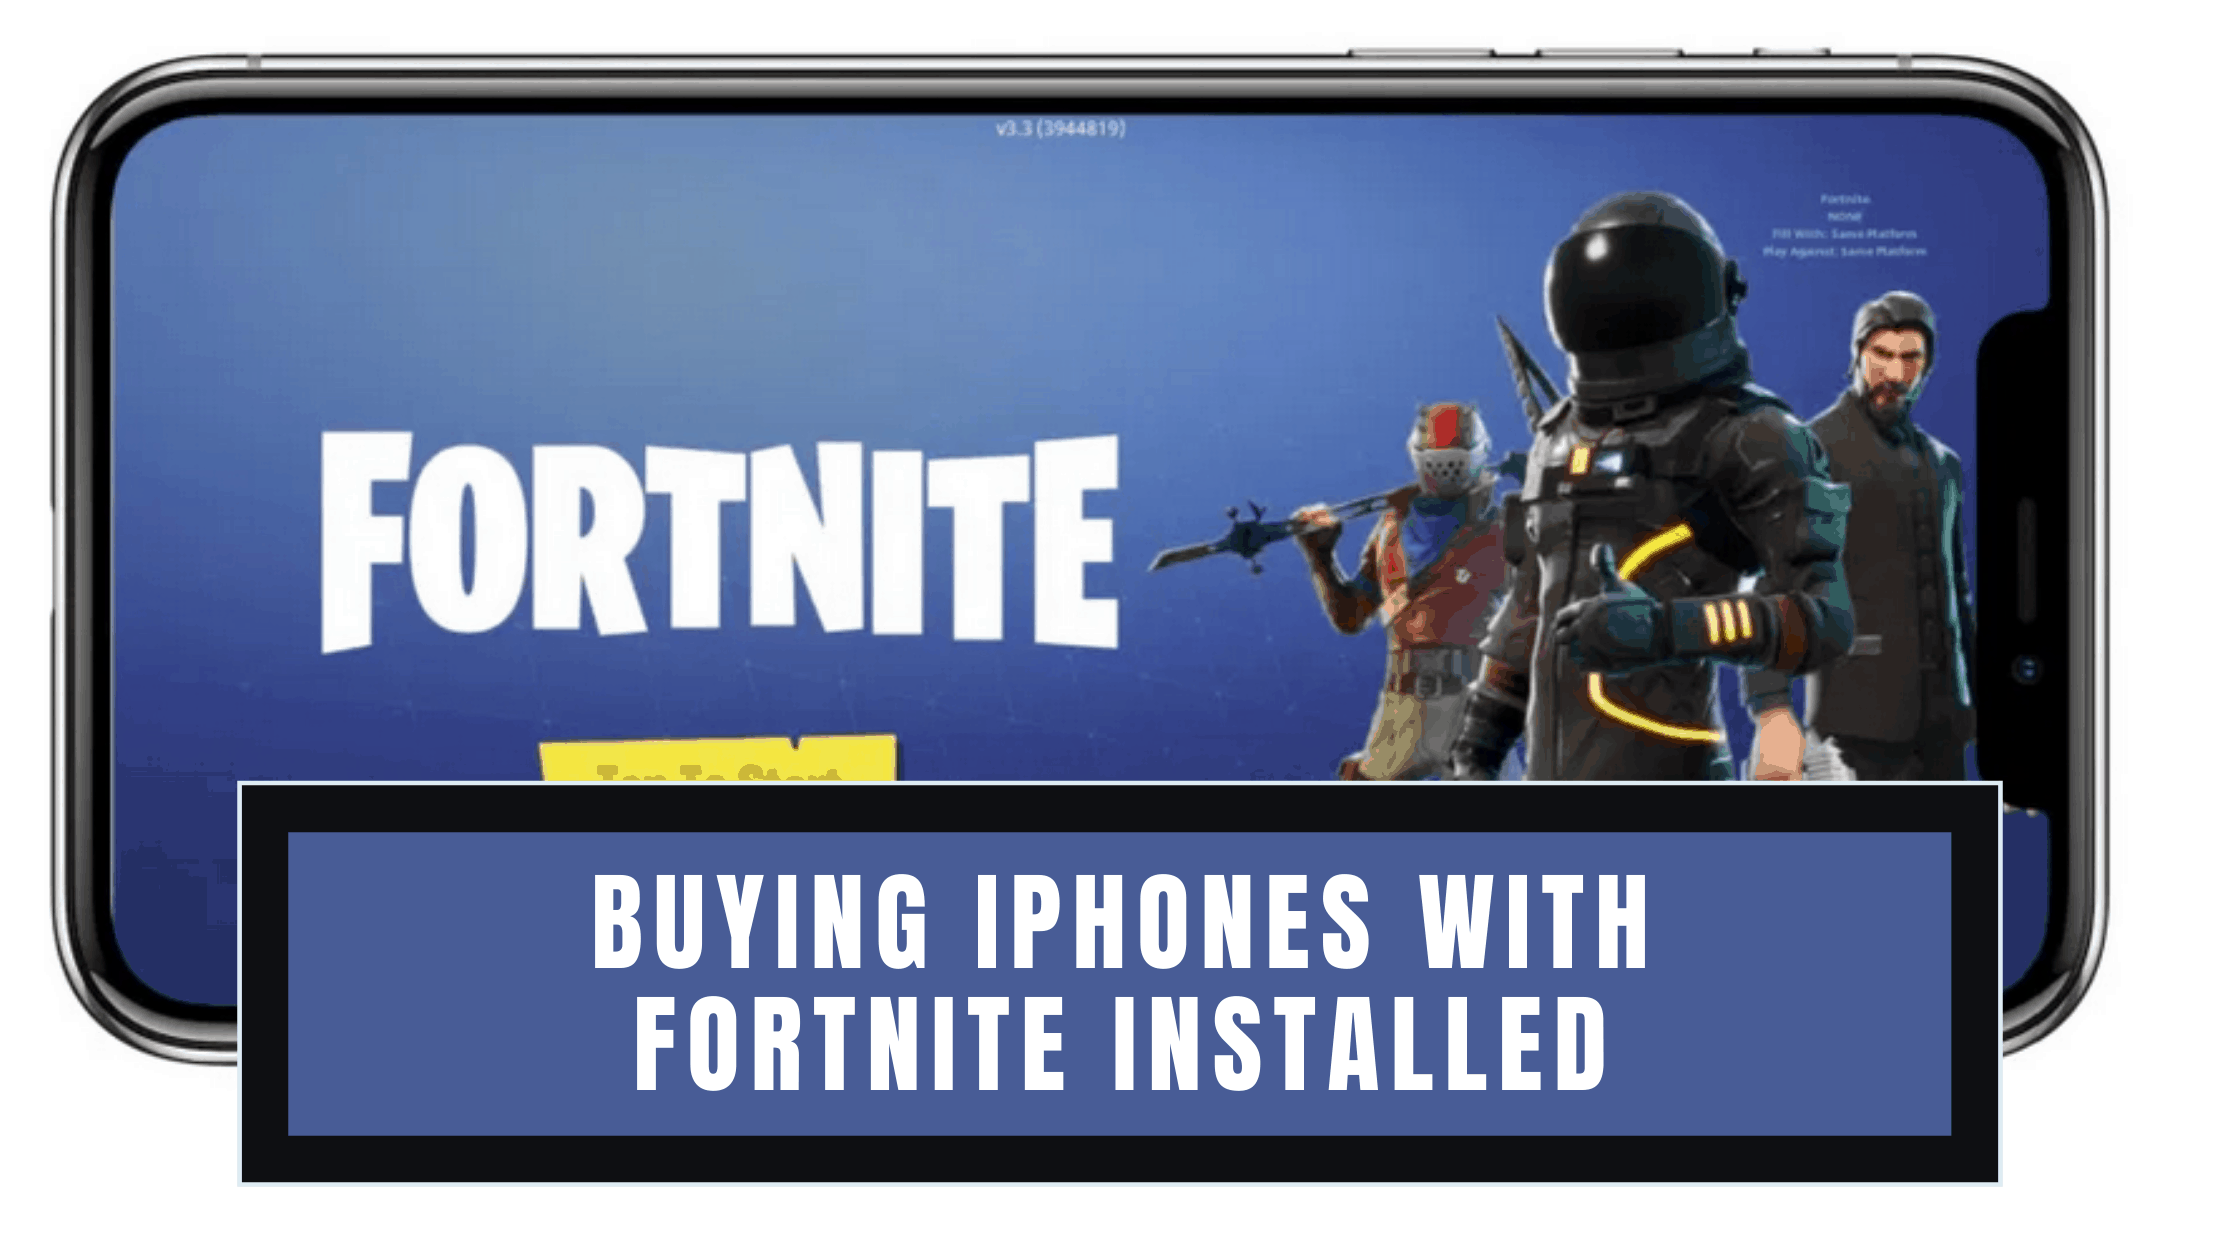 Buying iPhones with Fortnite Installed